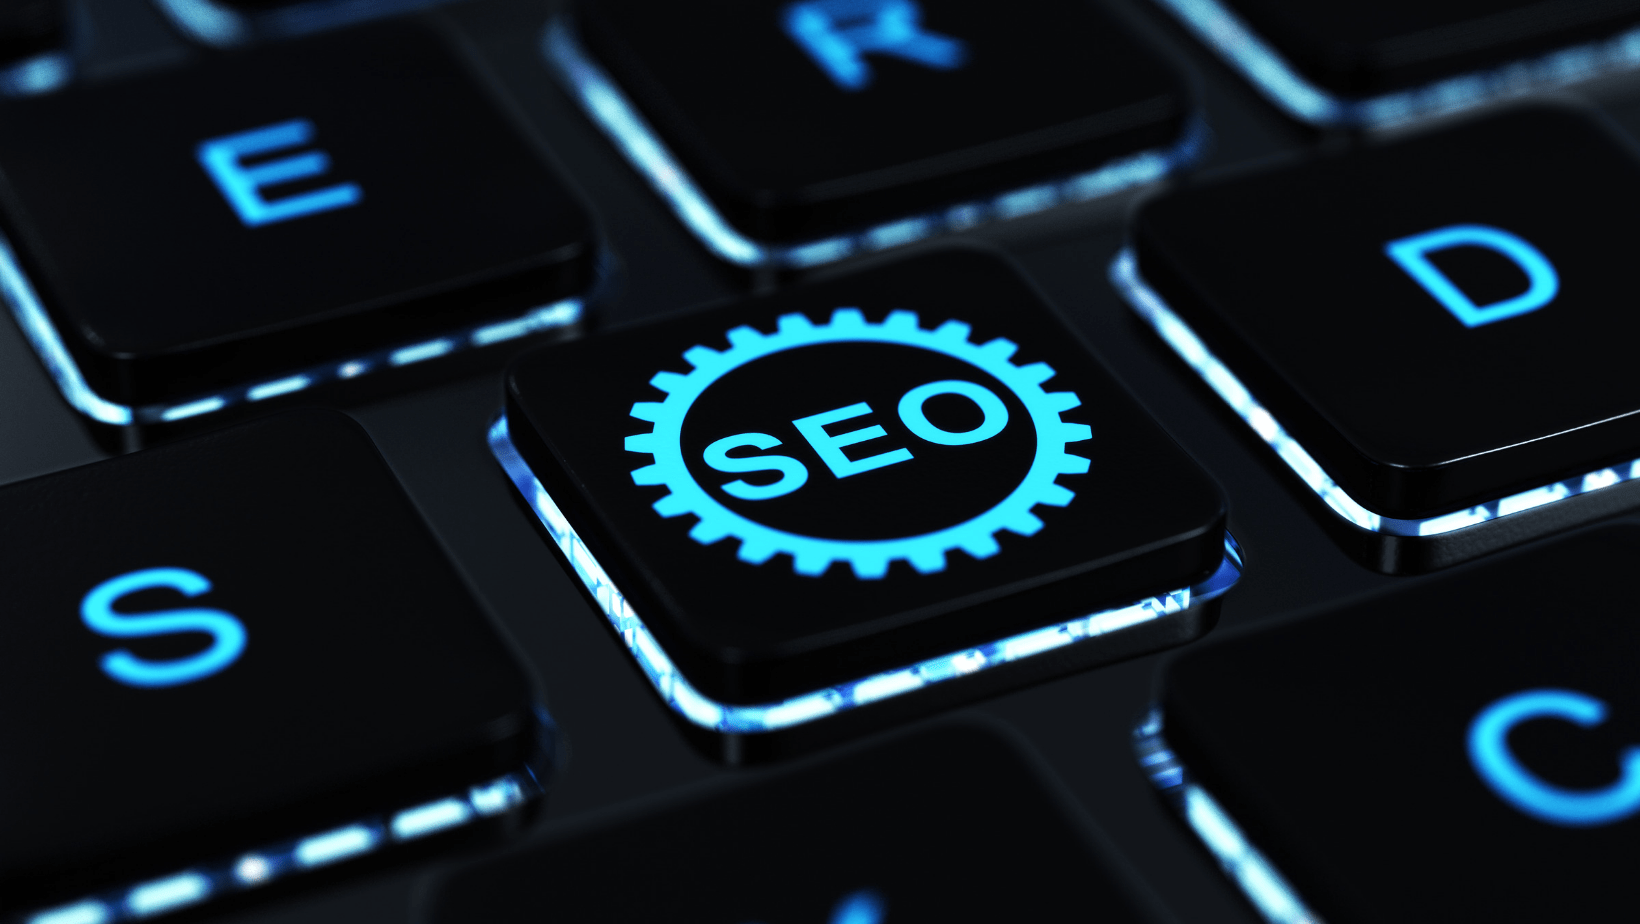 What is Semantic SEO, and how does it work?